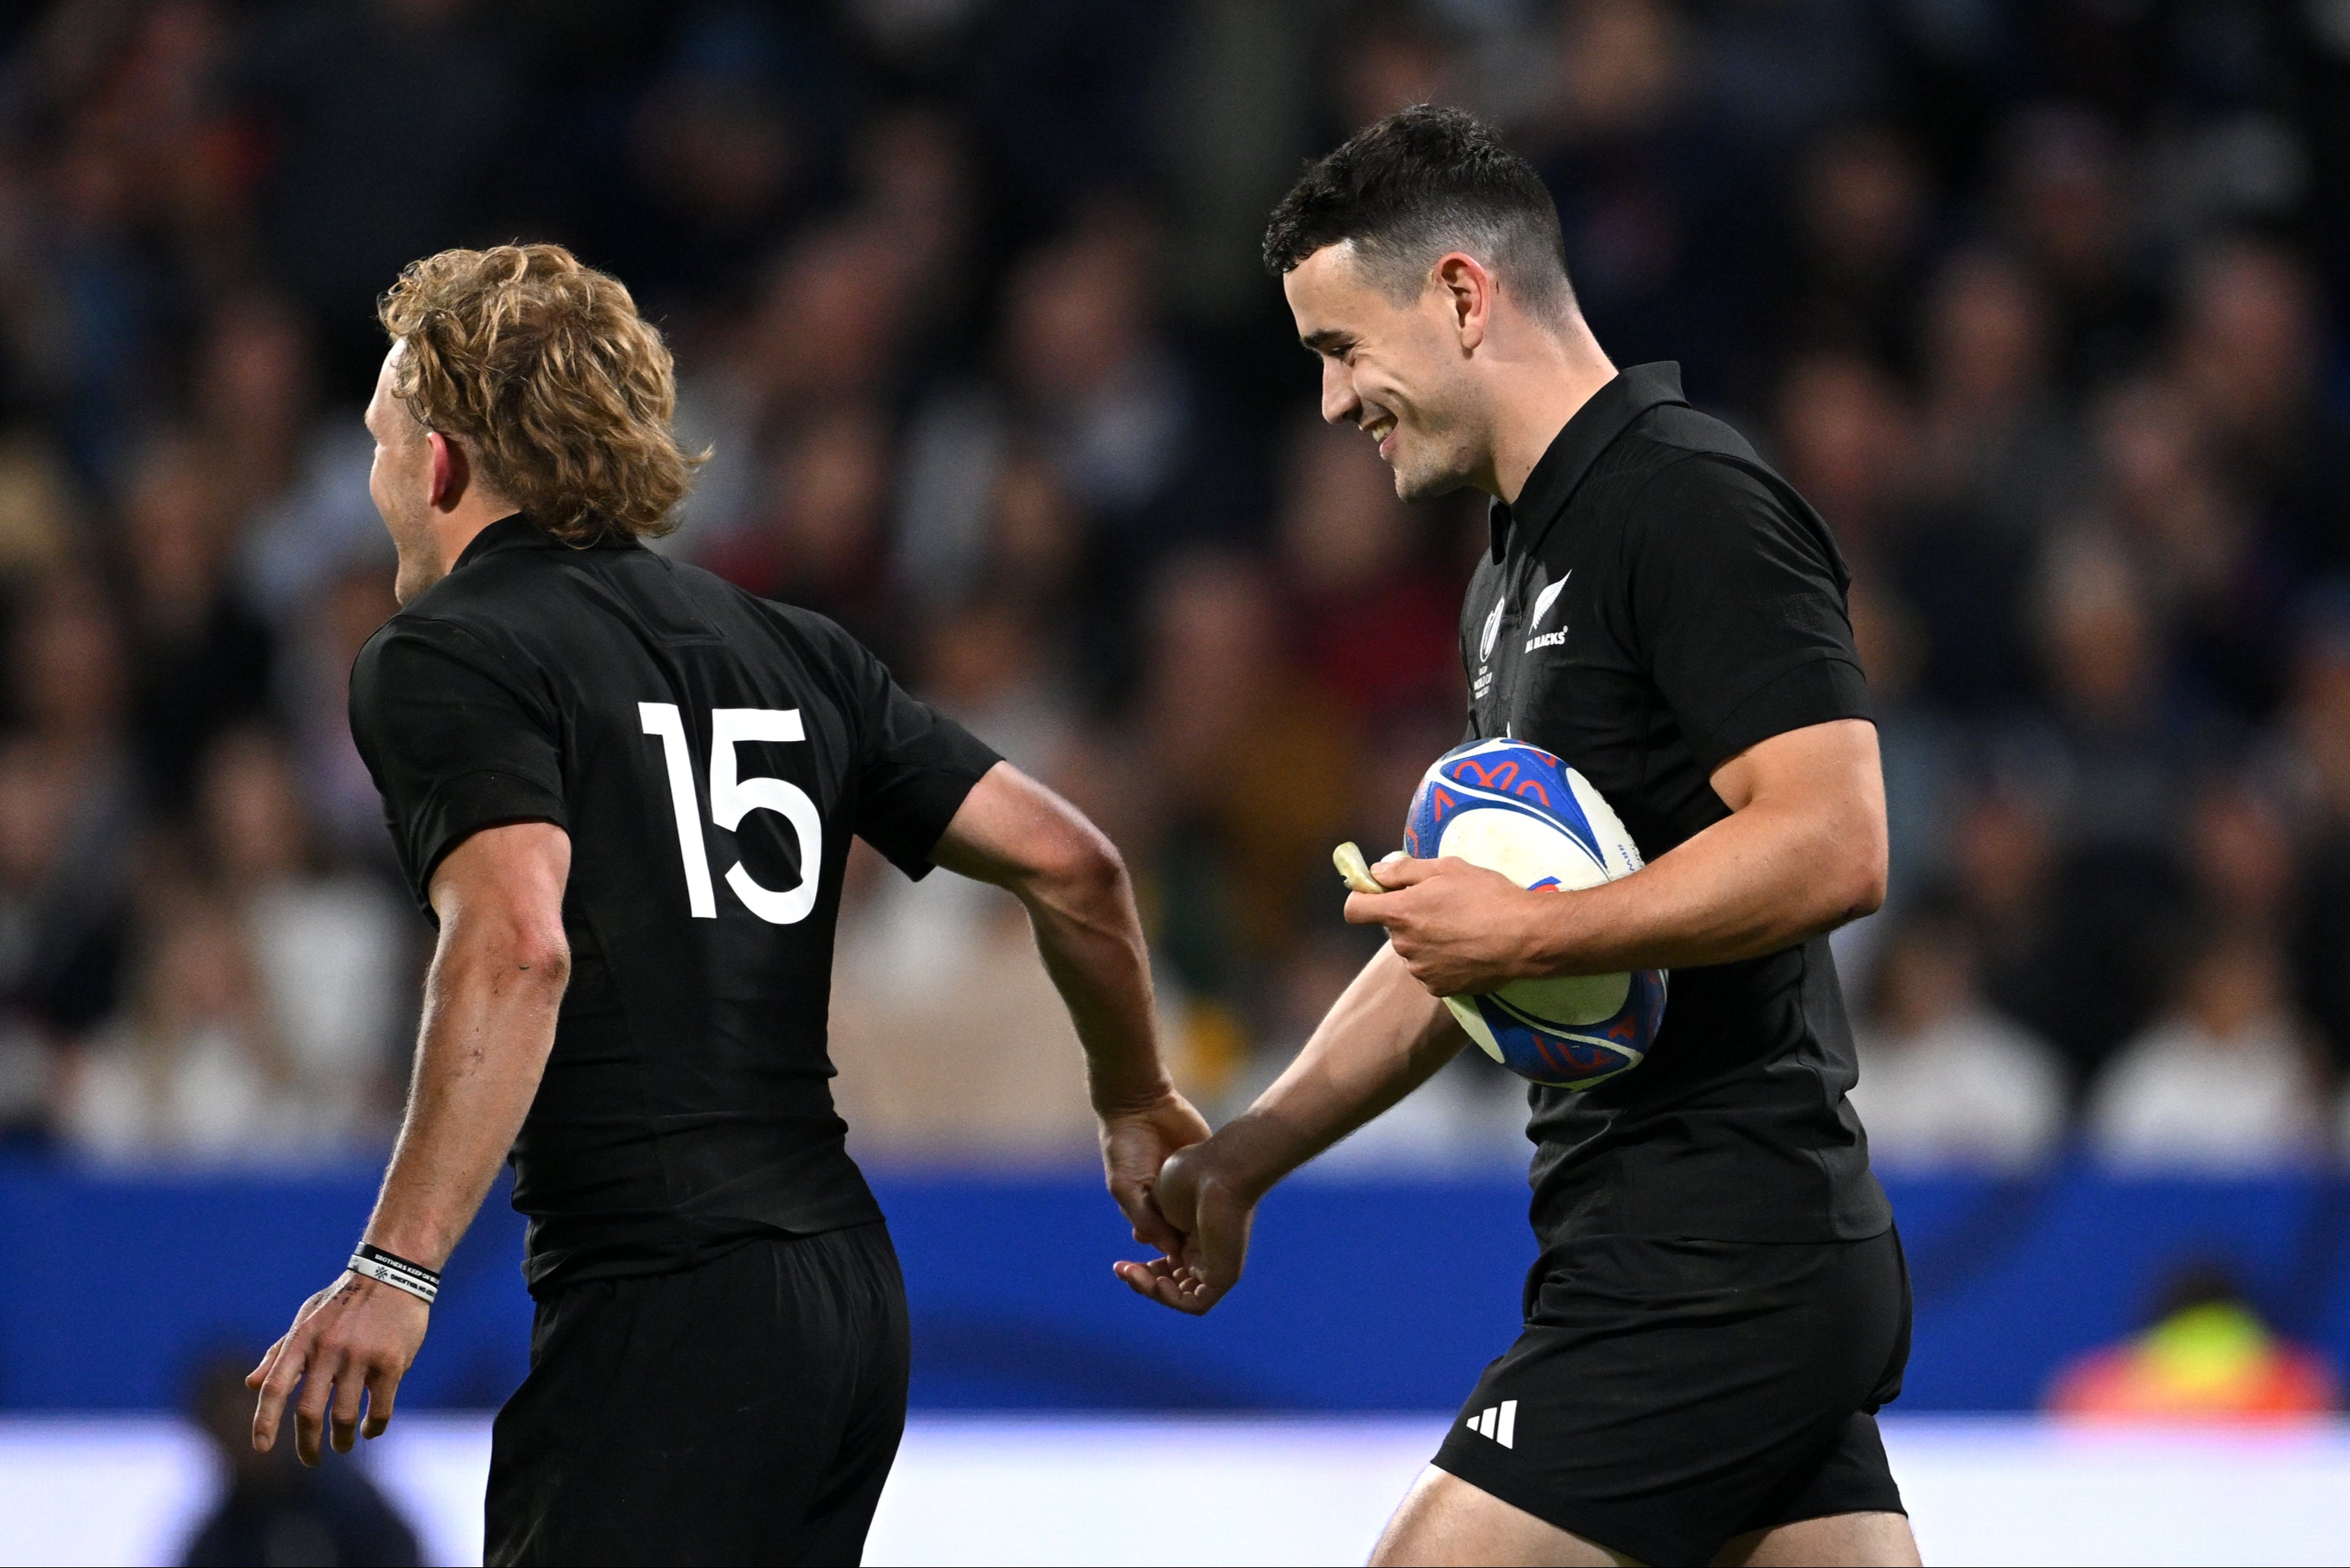 New Zealand again showcased their attacking game in an eleven-try win